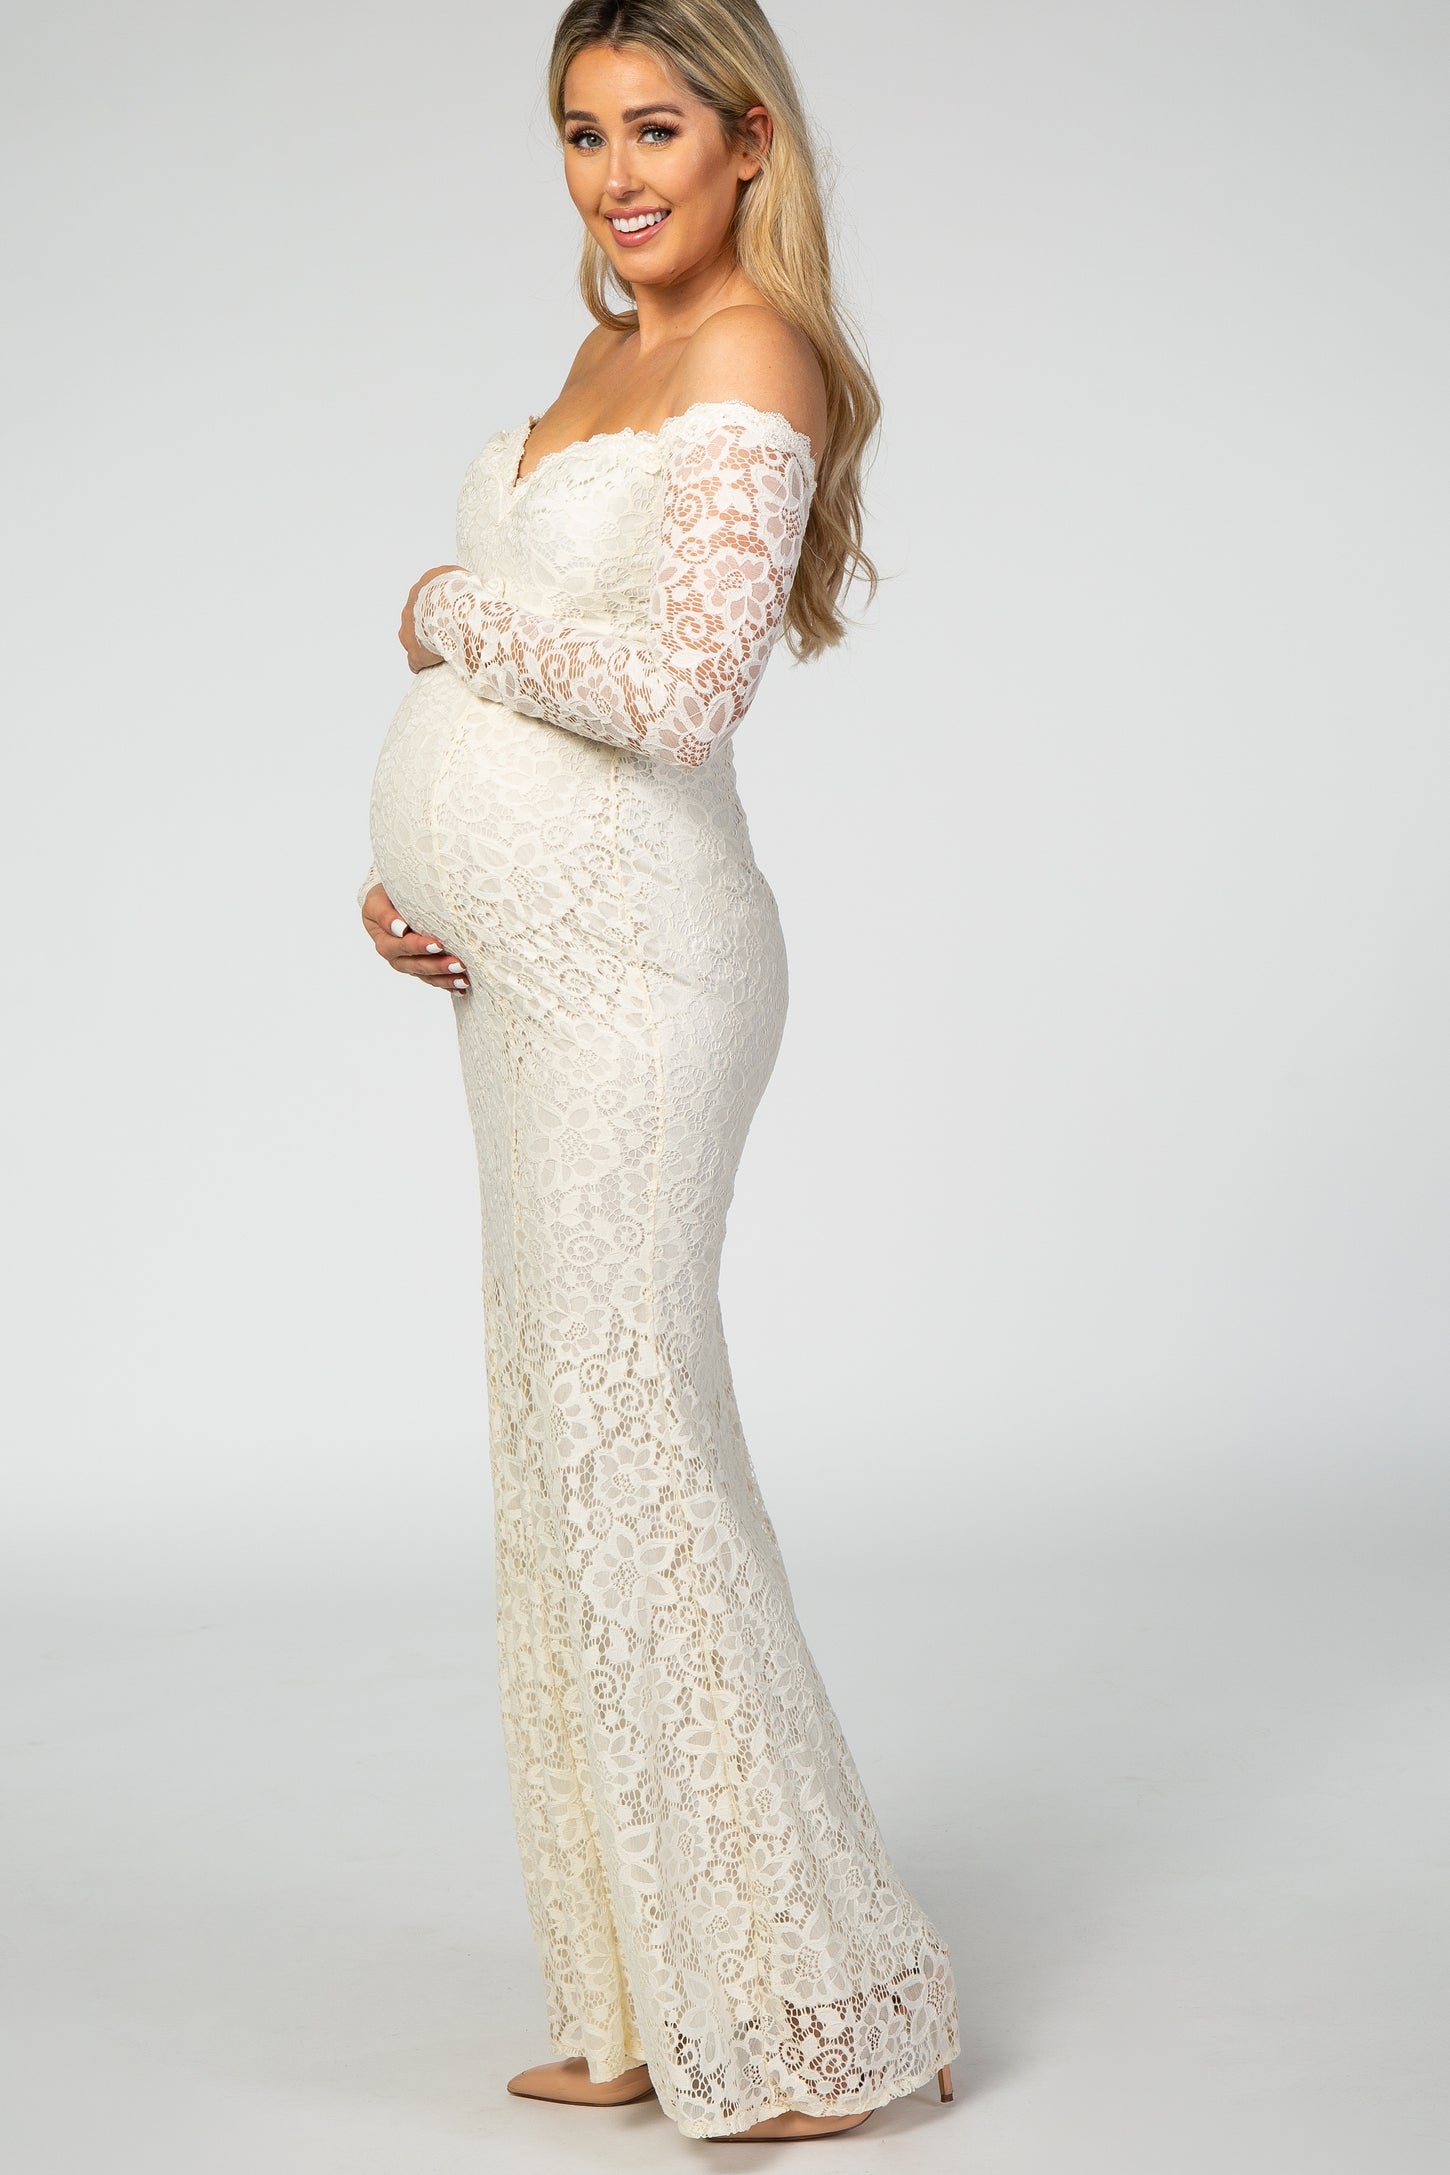 Pinkblush White Lace Off Shoulder Maternity Photoshoot Gown/Dress